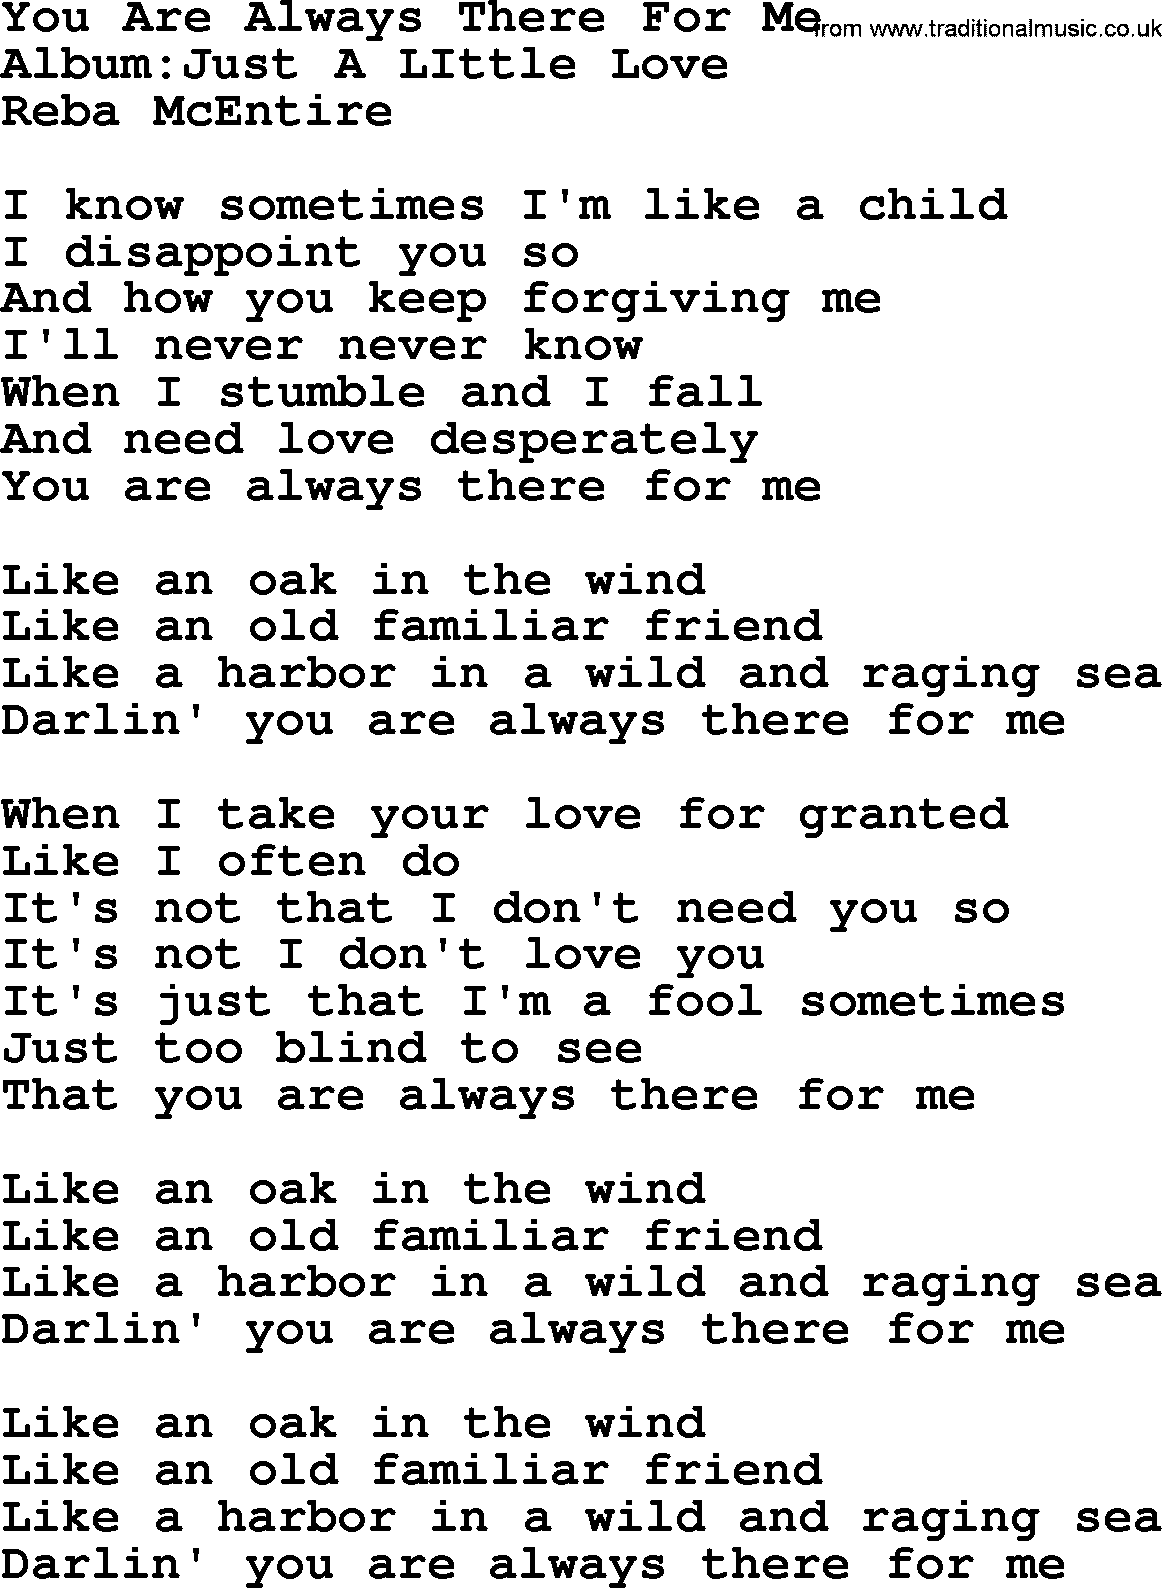 Reba McEntire song: You Are Always There For Me lyrics